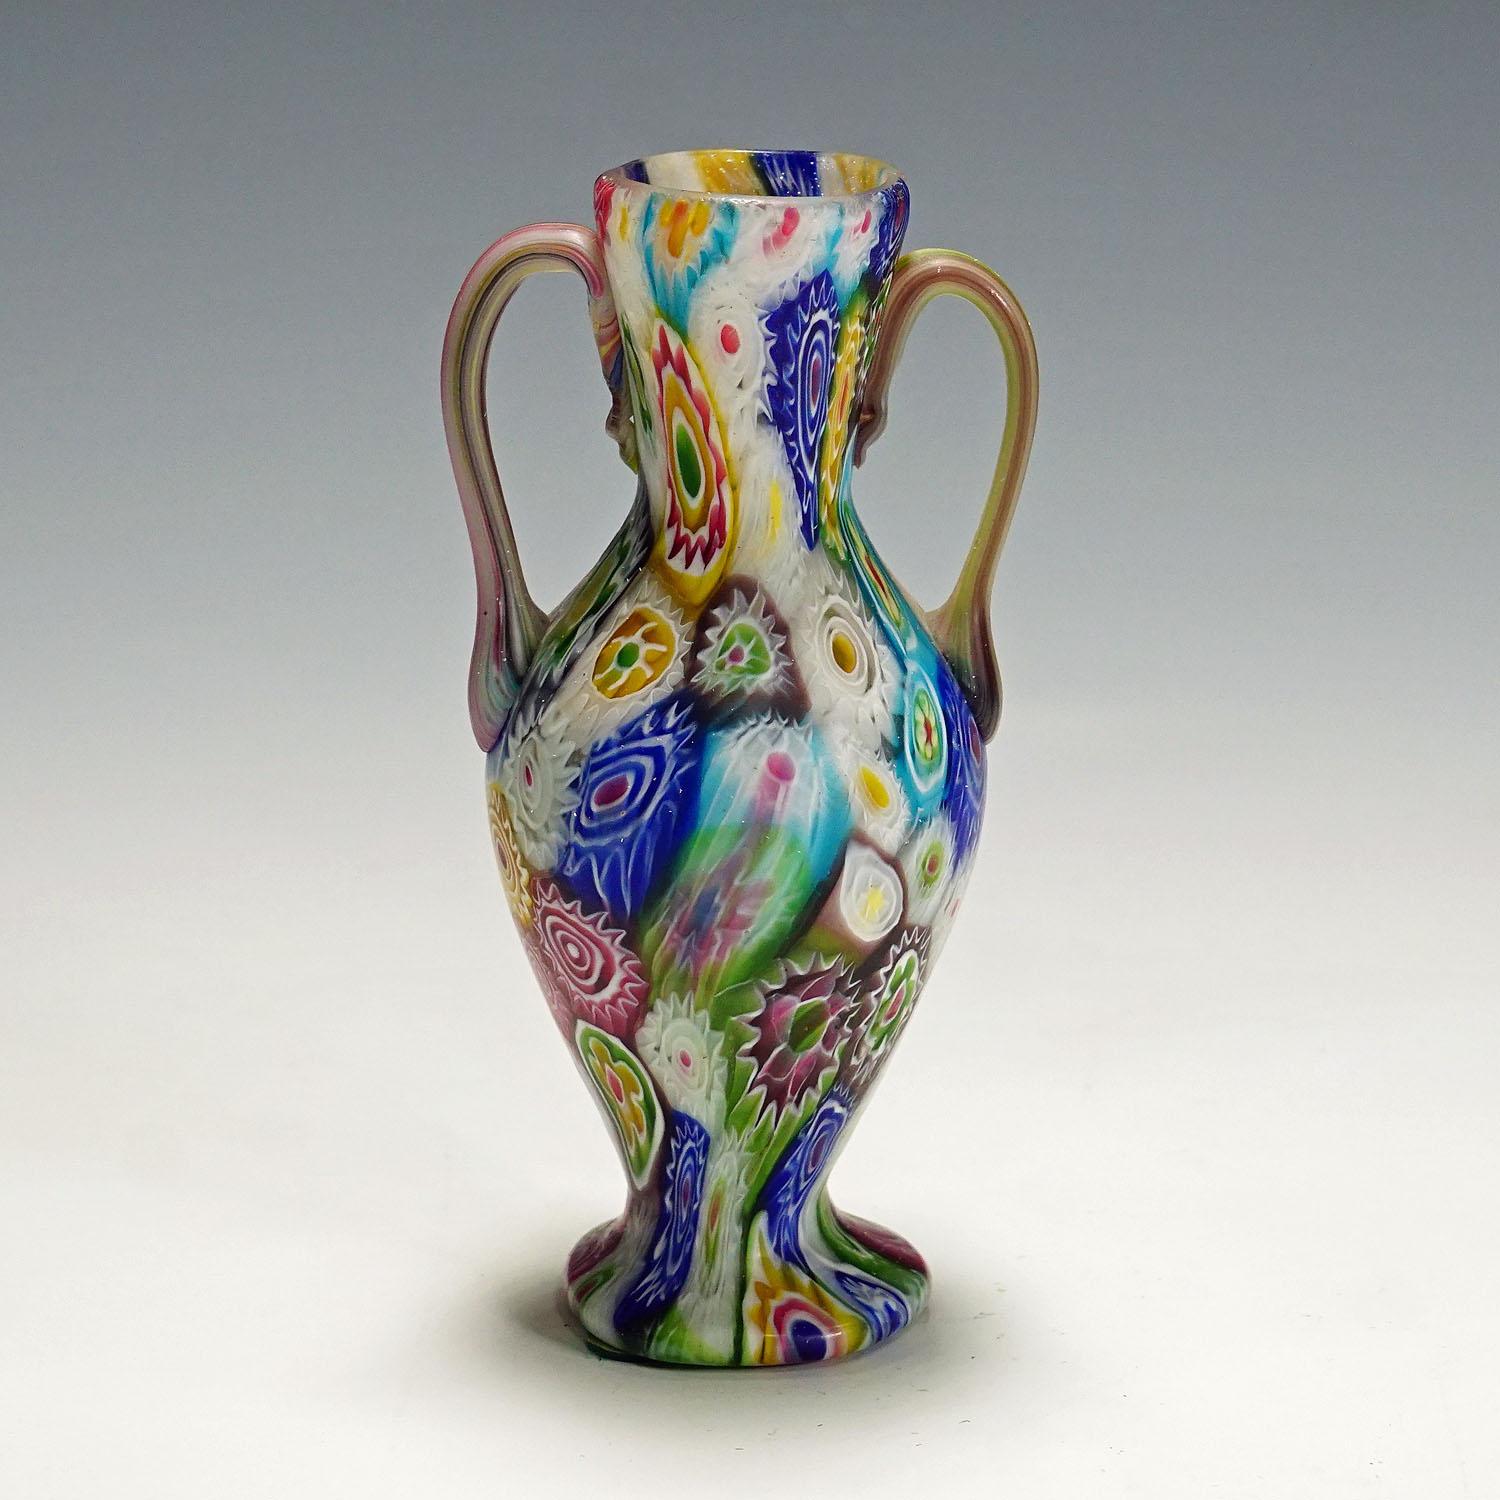 Art Glass Set of Handeled Millefiori Vases by Fratelli Toso, Murano circa 1910 For Sale